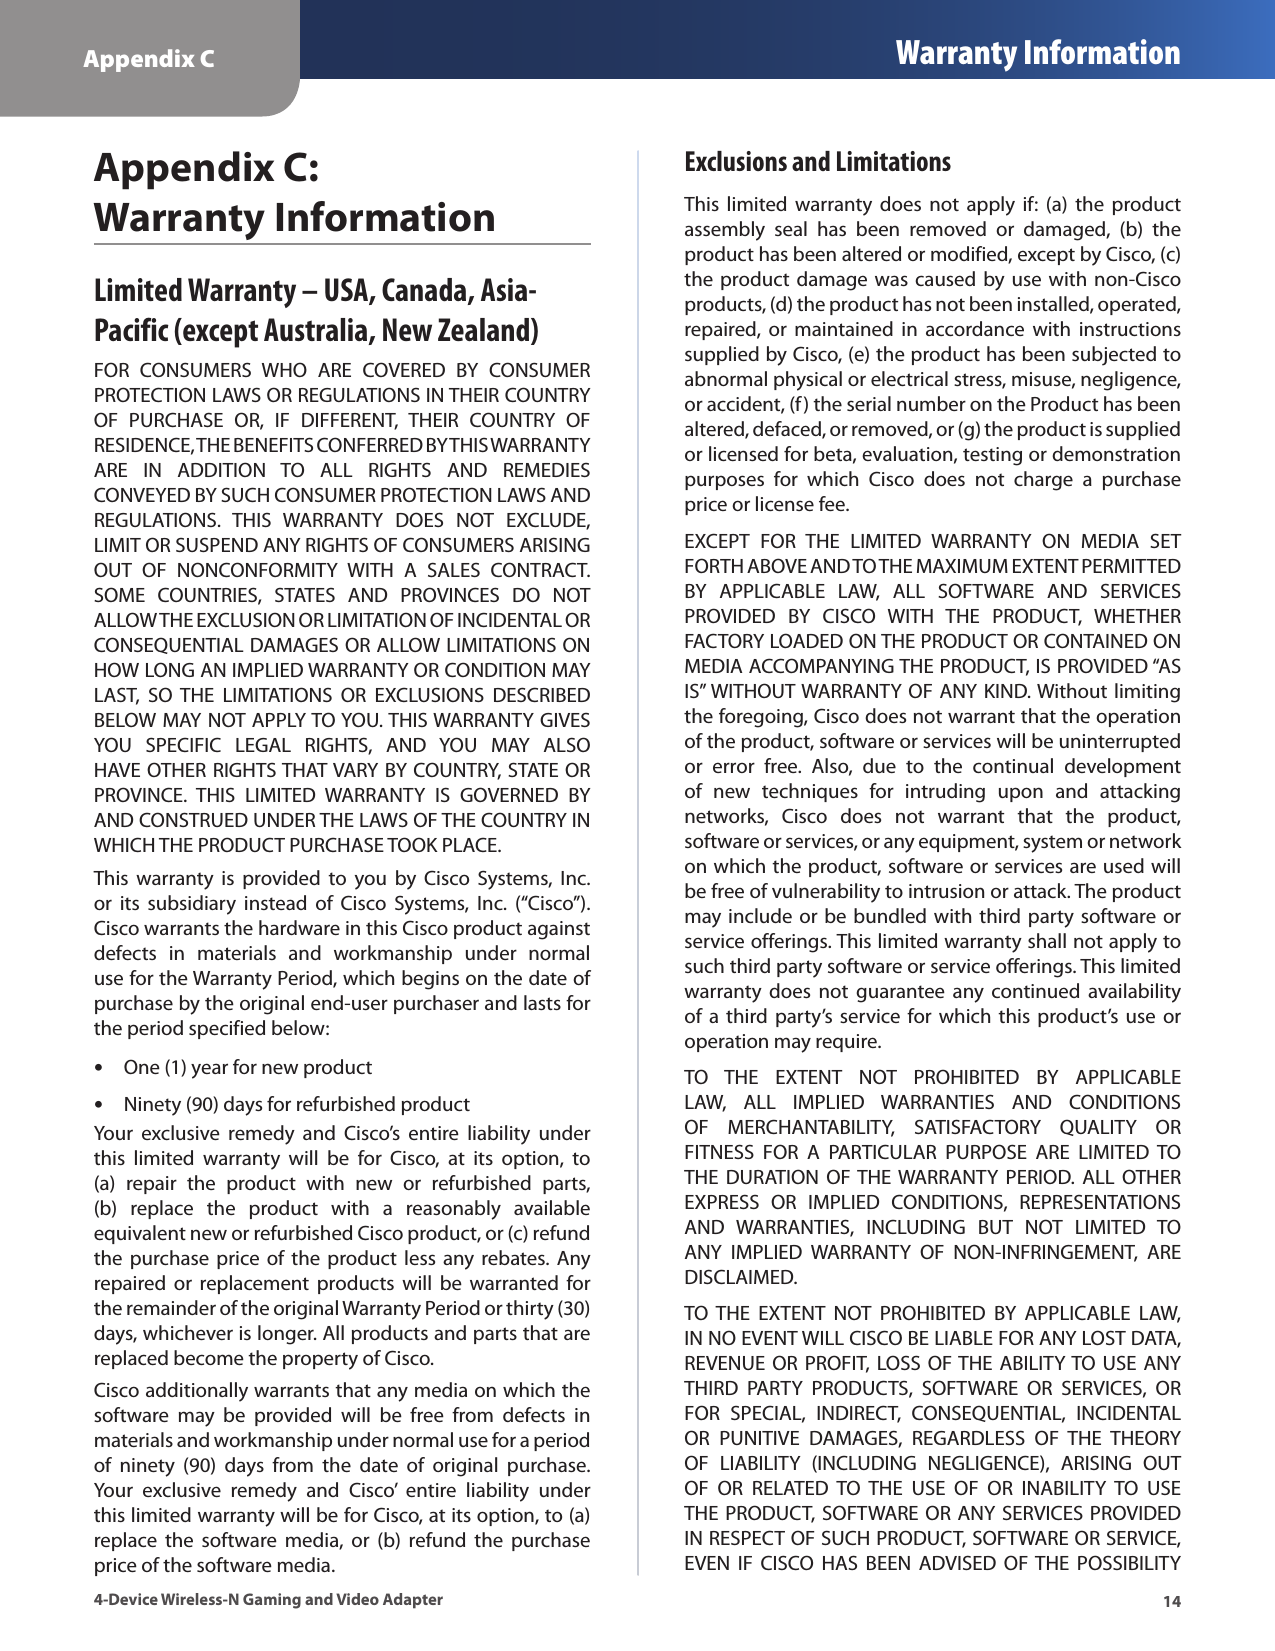 Appendix C Warranty Information144-Device Wireless-N Gaming and Video AdapterAppendix C:  Warranty InformationLimited Warranty – USA, Canada, Asia-Pacific (except Australia, New Zealand)FOR  CONSUMERS  WHO  ARE  COVERED  BY  CONSUMER PROTECTION LAWS OR REGULATIONS IN THEIR COUNTRY OF  PURCHASE  OR,  IF  DIFFERENT,  THEIR  COUNTRY  OF RESIDENCE, THE BENEFITS CONFERRED BY THIS WARRANTY ARE  IN  ADDITION  TO  ALL  RIGHTS  AND  REMEDIES CONVEYED BY SUCH CONSUMER PROTECTION LAWS AND REGULATIONS.  THIS  WARRANTY  DOES  NOT  EXCLUDE, LIMIT OR SUSPEND ANY RIGHTS OF CONSUMERS ARISING OUT  OF  NONCONFORMITY  WITH  A  SALES  CONTRACT. SOME  COUNTRIES,  STATES  AND  PROVINCES  DO  NOT ALLOW THE EXCLUSION OR LIMITATION OF INCIDENTAL OR CONSEQUENTIAL DAMAGES OR ALLOW LIMITATIONS ON HOW LONG AN IMPLIED WARRANTY OR CONDITION MAY LAST,  SO  THE  LIMITATIONS  OR  EXCLUSIONS  DESCRIBED BELOW MAY NOT APPLY TO YOU. THIS WARRANTY GIVES YOU  SPECIFIC  LEGAL  RIGHTS,  AND  YOU  MAY  ALSO HAVE OTHER RIGHTS THAT VARY BY COUNTRY, STATE OR PROVINCE.  THIS  LIMITED  WARRANTY  IS  GOVERNED  BY AND CONSTRUED UNDER THE LAWS OF THE COUNTRY IN WHICH THE PRODUCT PURCHASE TOOK PLACE.This  warranty  is  provided  to  you  by  Cisco  Systems,  Inc. or  its  subsidiary  instead  of  Cisco  Systems,  Inc.  (“Cisco”).  Cisco warrants the hardware in this Cisco product against defects  in  materials  and  workmanship  under  normal use for the Warranty Period, which begins on the date of purchase by the original end-user purchaser and lasts for the period specified below: •One (1) year for new product •Ninety (90) days for refurbished productYour  exclusive  remedy  and  Cisco’s  entire  liability  under this  limited  warranty  will  be  for  Cisco,  at  its  option,  to (a)  repair  the  product  with  new  or  refurbished  parts, (b)  replace  the  product  with  a  reasonably  available equivalent new or refurbished Cisco product, or (c) refund the purchase  price of  the  product less  any  rebates. Any repaired or  replacement  products  will  be  warranted  for the remainder of the original Warranty Period or thirty (30) days, whichever is longer. All products and parts that are replaced become the property of Cisco.Cisco additionally warrants that any media on which the software  may  be  provided  will  be  free  from  defects  in materials and workmanship under normal use for a period of  ninety  (90)  days  from  the  date  of  original  purchase. Your  exclusive  remedy  and  Cisco’  entire  liability  under this limited warranty will be for Cisco, at its option, to (a) replace  the  software  media,  or  (b)  refund  the  purchase price of the software media.Exclusions and LimitationsThis  limited warranty  does  not apply  if:  (a)  the product assembly  seal  has  been  removed  or  damaged,  (b)  the product has been altered or modified, except by Cisco, (c) the product damage was caused by use  with  non-Cisco products, (d) the product has not been installed, operated, repaired,  or  maintained  in  accordance  with  instructions supplied by Cisco, (e) the product has been subjected to abnormal physical or electrical stress, misuse, negligence, or accident, (f) the serial number on the Product has been altered, defaced, or removed, or (g) the product is supplied or licensed for beta, evaluation, testing or demonstration purposes  for  which  Cisco  does  not  charge  a  purchase price or license fee.EXCEPT  FOR  THE  LIMITED  WARRANTY  ON  MEDIA  SET FORTH ABOVE AND TO THE MAXIMUM EXTENT PERMITTED BY  APPLICABLE  LAW,  ALL  SOFTWARE  AND  SERVICES PROVIDED  BY  CISCO  WITH  THE  PRODUCT,  WHETHER FACTORY LOADED ON THE PRODUCT OR CONTAINED ON MEDIA ACCOMPANYING THE PRODUCT, IS PROVIDED “AS IS” WITHOUT WARRANTY OF ANY KIND. Without limiting the foregoing, Cisco does not warrant that the operation of the product, software or services will be uninterrupted or  error  free.  Also,  due  to  the  continual  development of  new  techniques  for  intruding  upon  and  attacking networks,  Cisco  does  not  warrant  that  the  product, software or services, or any equipment, system or network on which the product, software or services are used will be free of vulnerability to intrusion or attack. The product may include or be bundled with third party  software or service offerings. This limited warranty shall not apply to such third party software or service offerings. This limited warranty  does  not  guarantee  any  continued  availability of a  third party’s  service  for  which this  product’s use  or operation may require. TO  THE  EXTENT  NOT  PROHIBITED  BY  APPLICABLE LAW,  ALL  IMPLIED  WARRANTIES  AND  CONDITIONS OF  MERCHANTABILITY,  SATISFACTORY  QUALITY  OR FITNESS  FOR  A  PARTICULAR  PURPOSE  ARE  LIMITED  TO THE  DURATION  OF THE WARRANTY  PERIOD. ALL  OTHER EXPRESS  OR  IMPLIED  CONDITIONS,  REPRESENTATIONS AND  WARRANTIES,  INCLUDING  BUT  NOT  LIMITED  TO ANY  IMPLIED  WARRANTY  OF  NON-INFRINGEMENT,  ARE DISCLAIMED. TO  THE  EXTENT  NOT  PROHIBITED  BY  APPLICABLE  LAW, IN NO EVENT WILL CISCO BE LIABLE FOR ANY LOST DATA, REVENUE OR  PROFIT,  LOSS OF THE  ABILITY TO USE ANY THIRD  PARTY  PRODUCTS,  SOFTWARE  OR  SERVICES,  OR FOR  SPECIAL,  INDIRECT,  CONSEQUENTIAL,  INCIDENTAL OR  PUNITIVE  DAMAGES,  REGARDLESS  OF  THE  THEORY OF  LIABILITY  (INCLUDING  NEGLIGENCE),  ARISING  OUT OF  OR  RELATED  TO  THE  USE  OF  OR  INABILITY  TO  USE THE PRODUCT,  SOFTWARE OR ANY SERVICES PROVIDED IN RESPECT OF SUCH PRODUCT, SOFTWARE OR SERVICE, EVEN  IF  CISCO  HAS  BEEN  ADVISED  OF THE  POSSIBILITY 